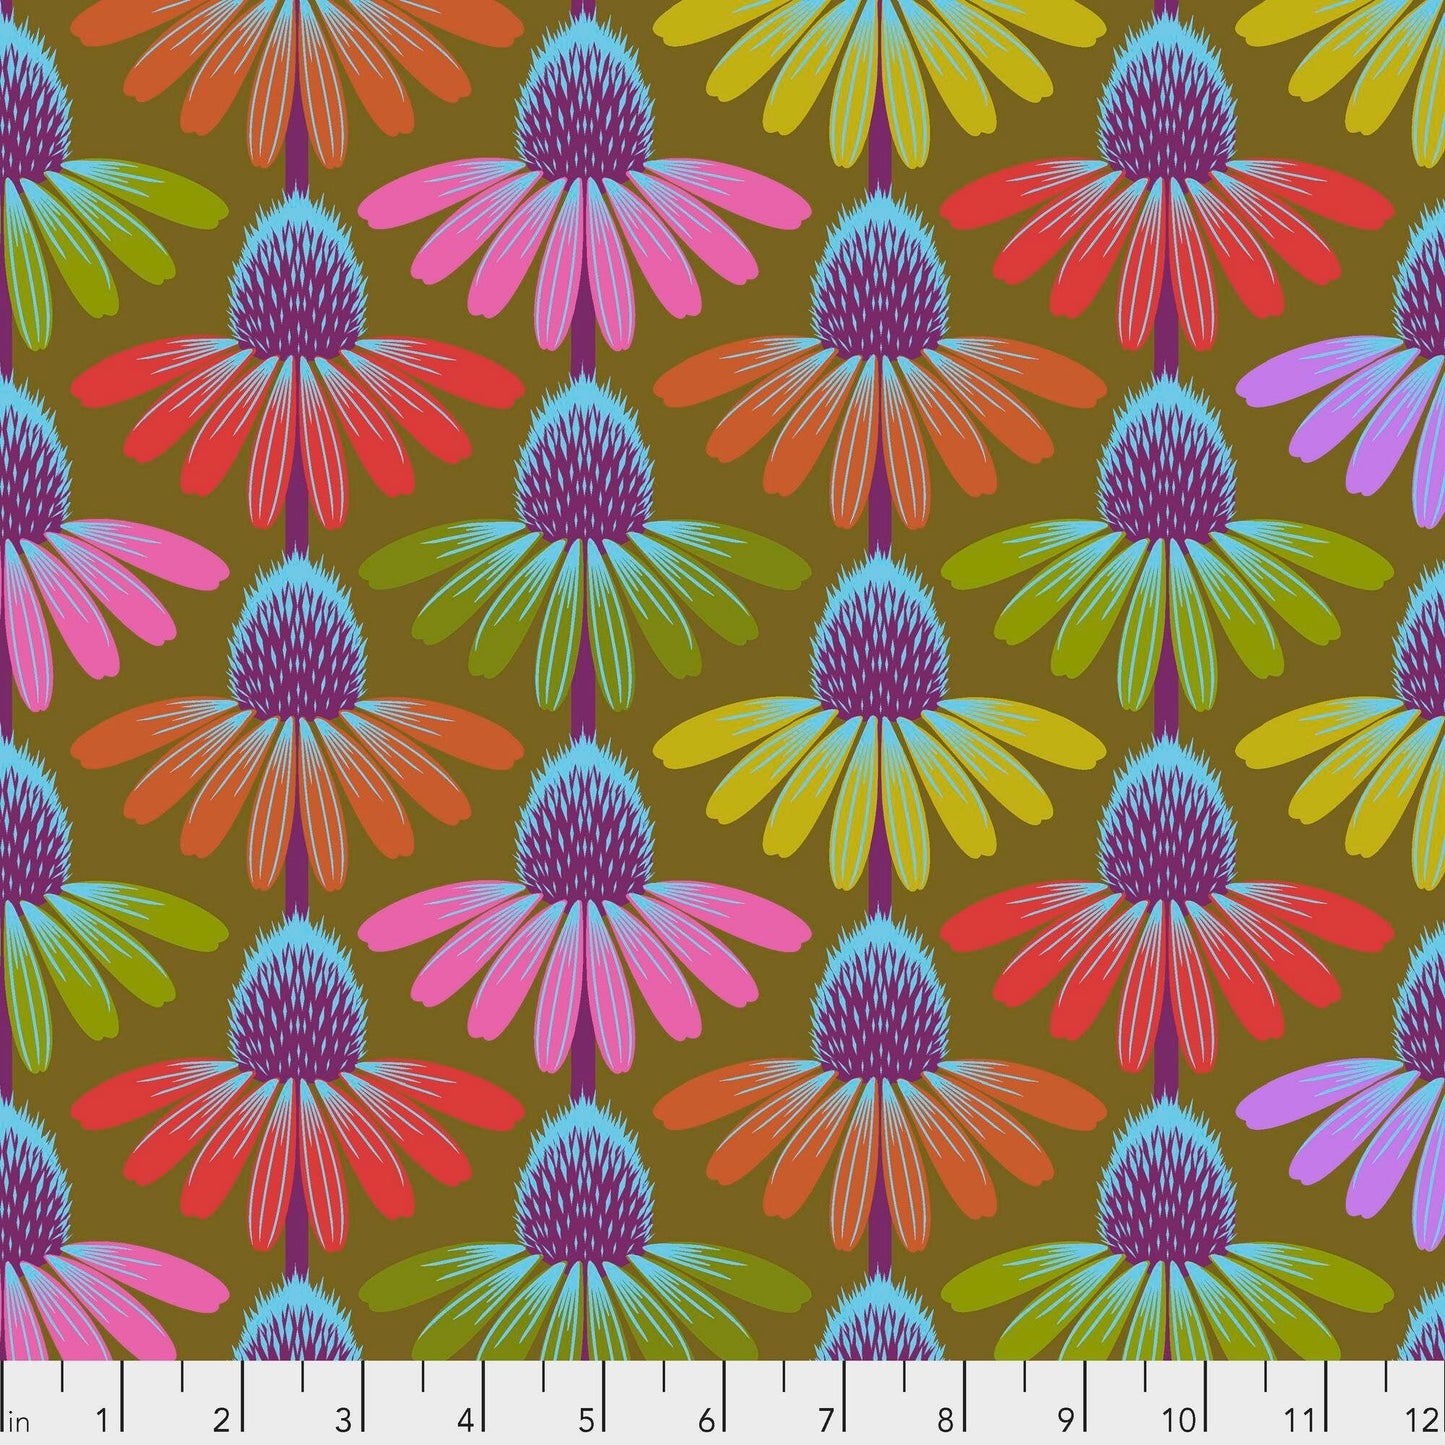 Echinacea Glow Autumn PWAH149, HINDSIGHT, Anna Maria Horner, Cone Flower, Quilt Fabric, Cotton Fabric, Floral Fabric, Fabric By The Yard